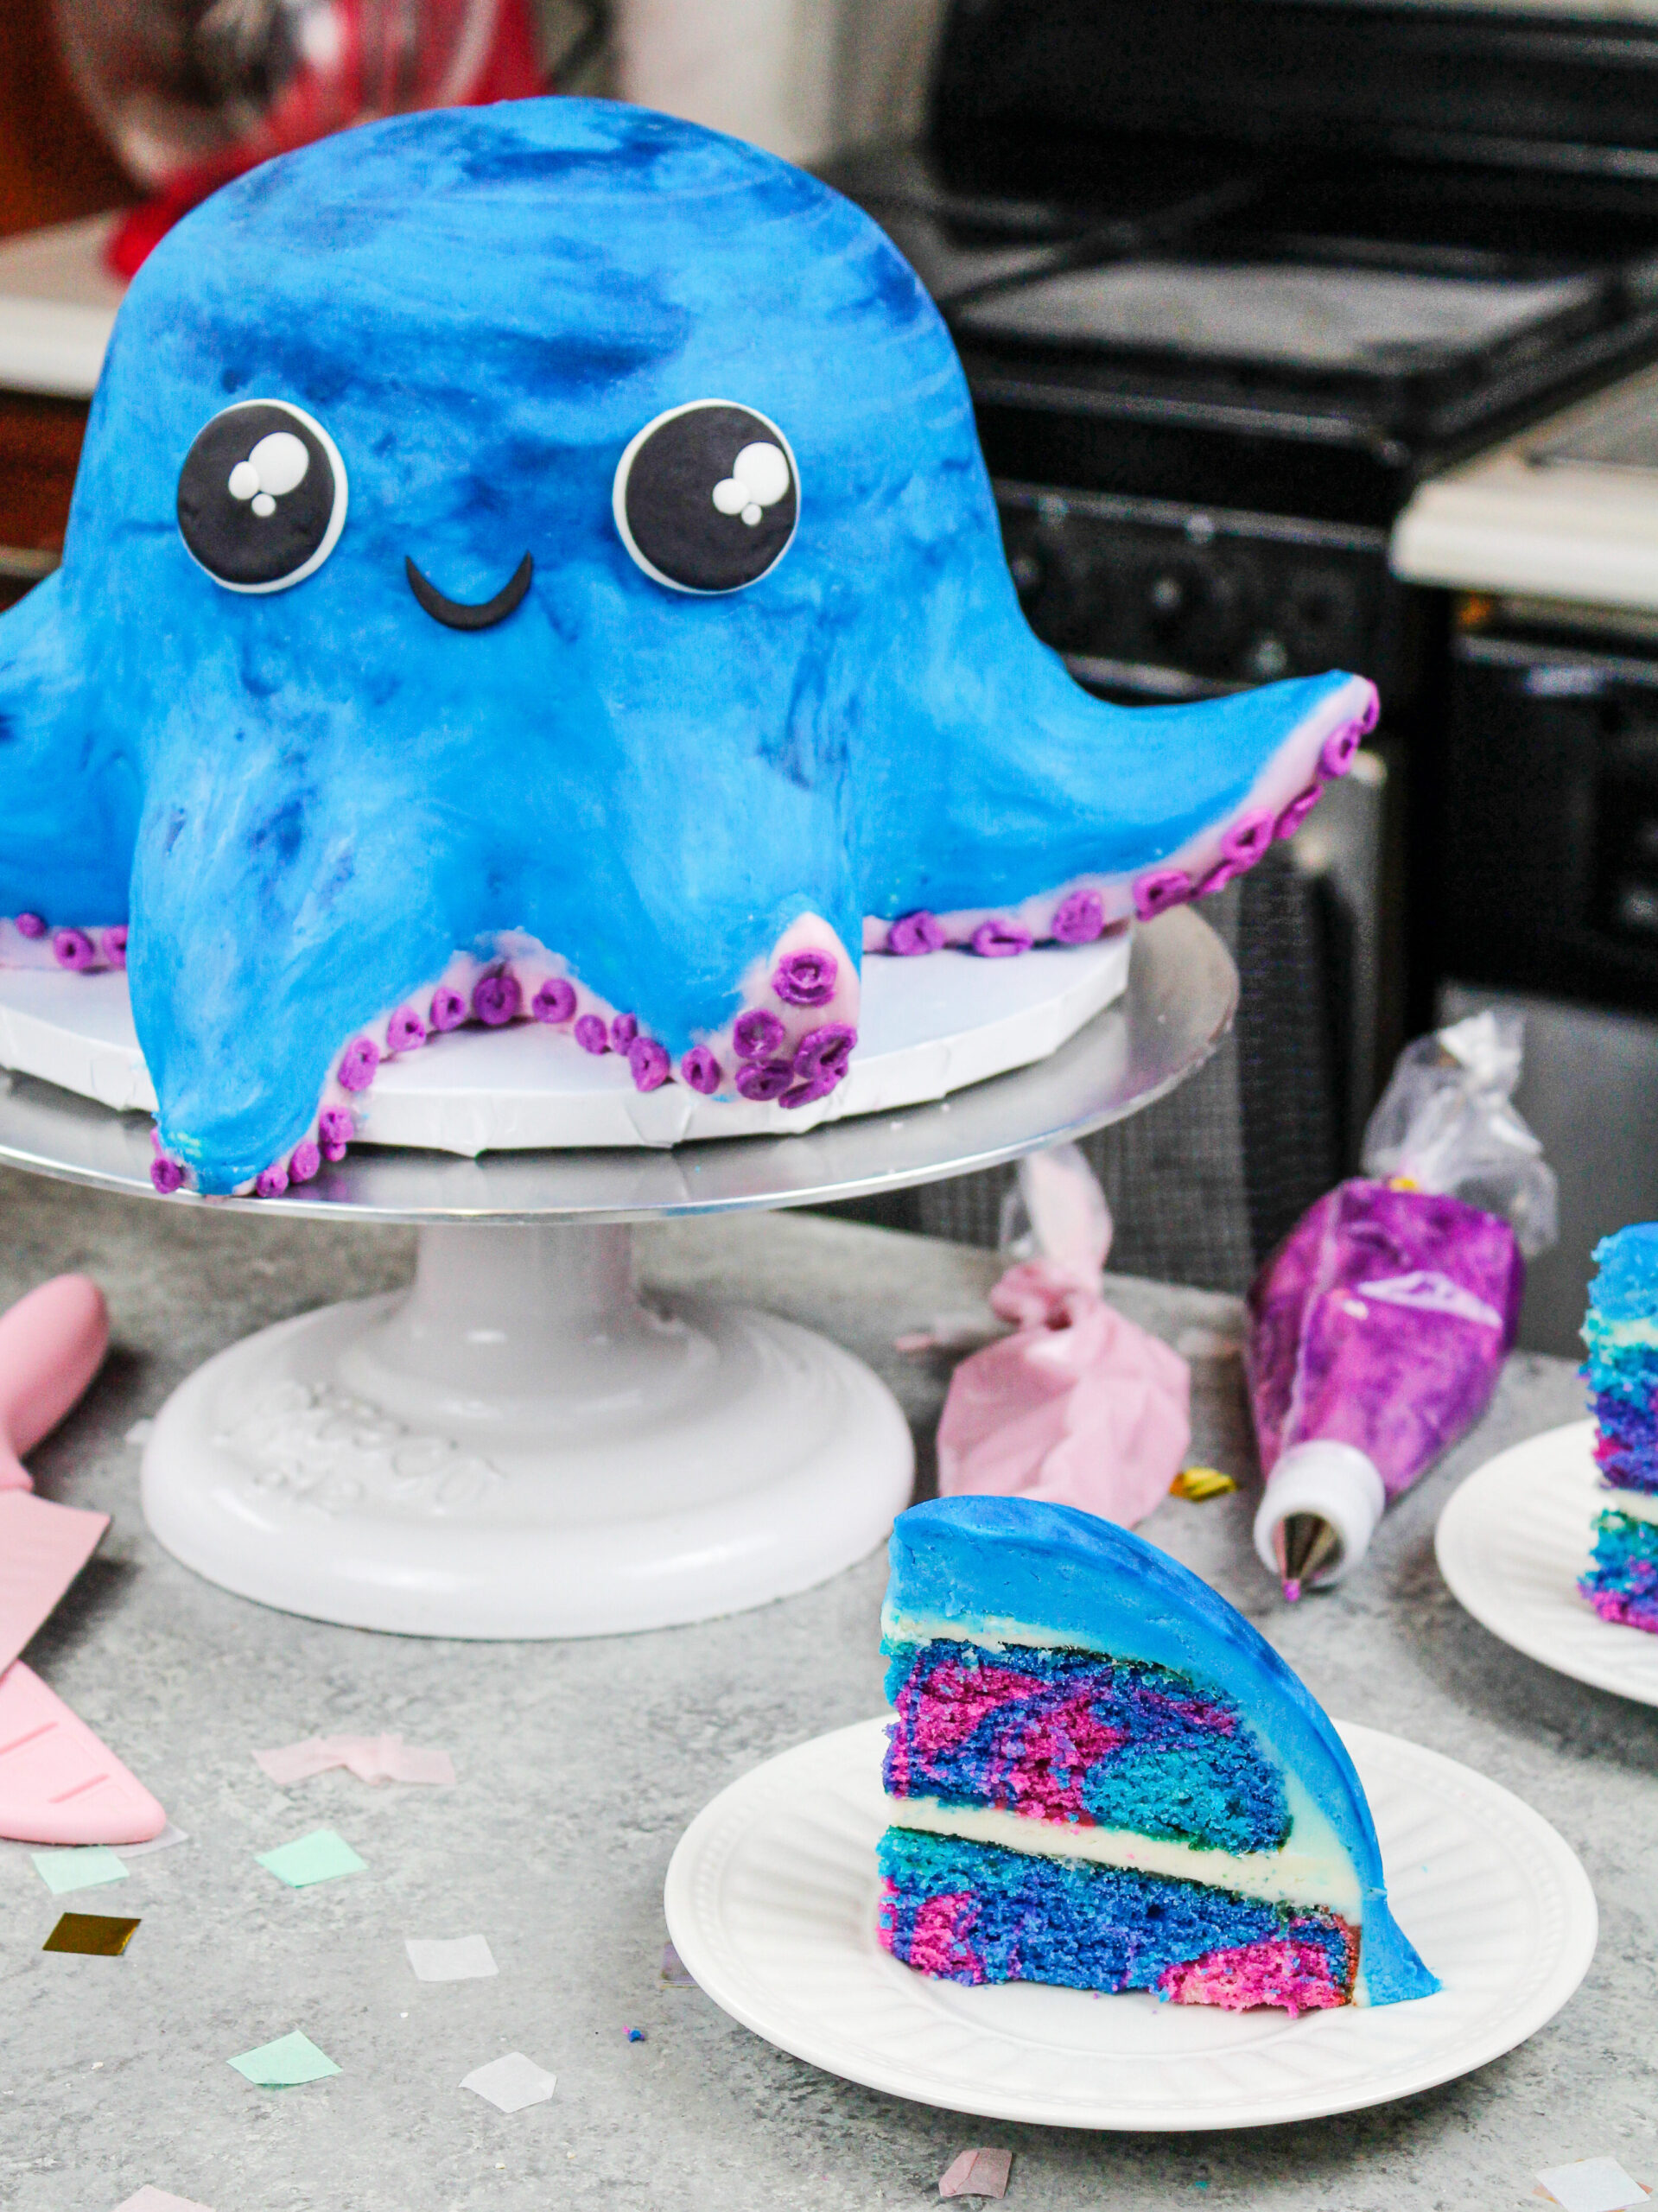 image of an octopus cake made with colorful cake layers and homemade buttercream